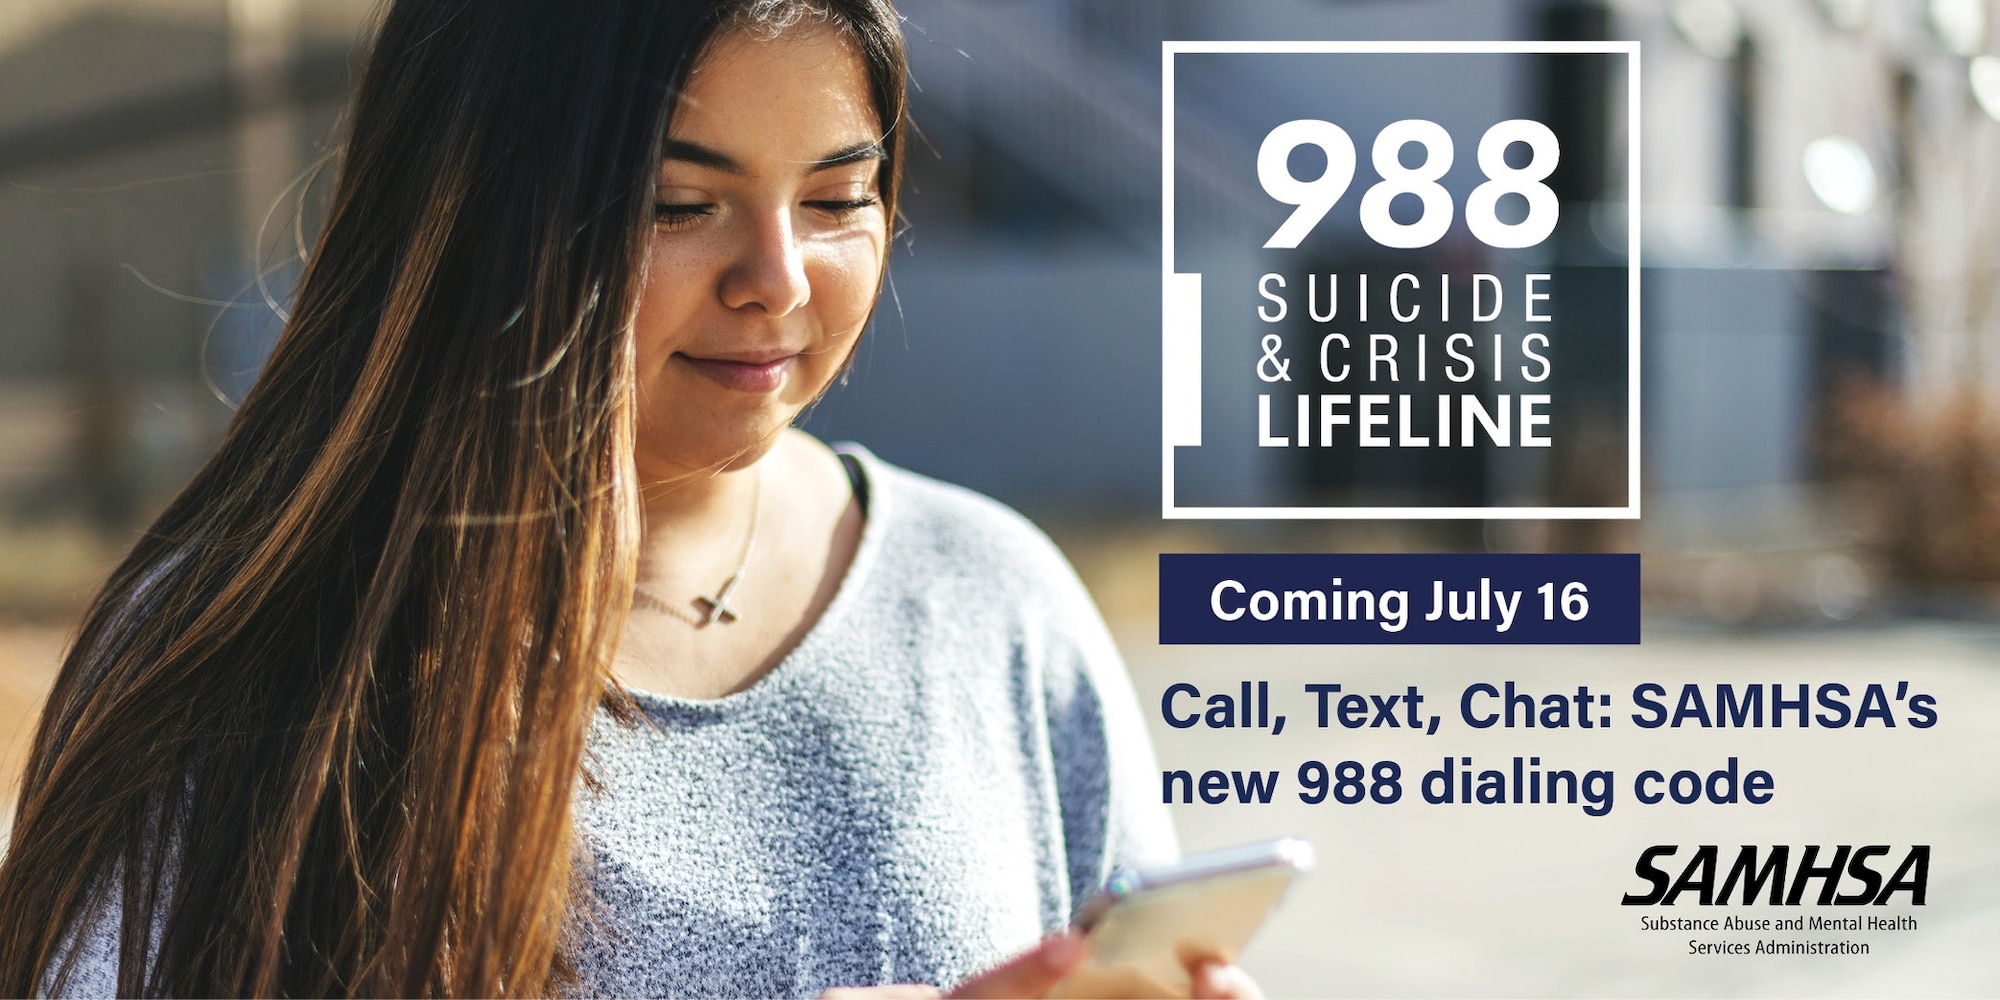 Graphic showing a photo of a girl on her cellphone and the following text: "988 Suicide & Crisis Lifeline. Coming July 16. Call, Text, Chat: SAMHSA's new 988 dialing code."